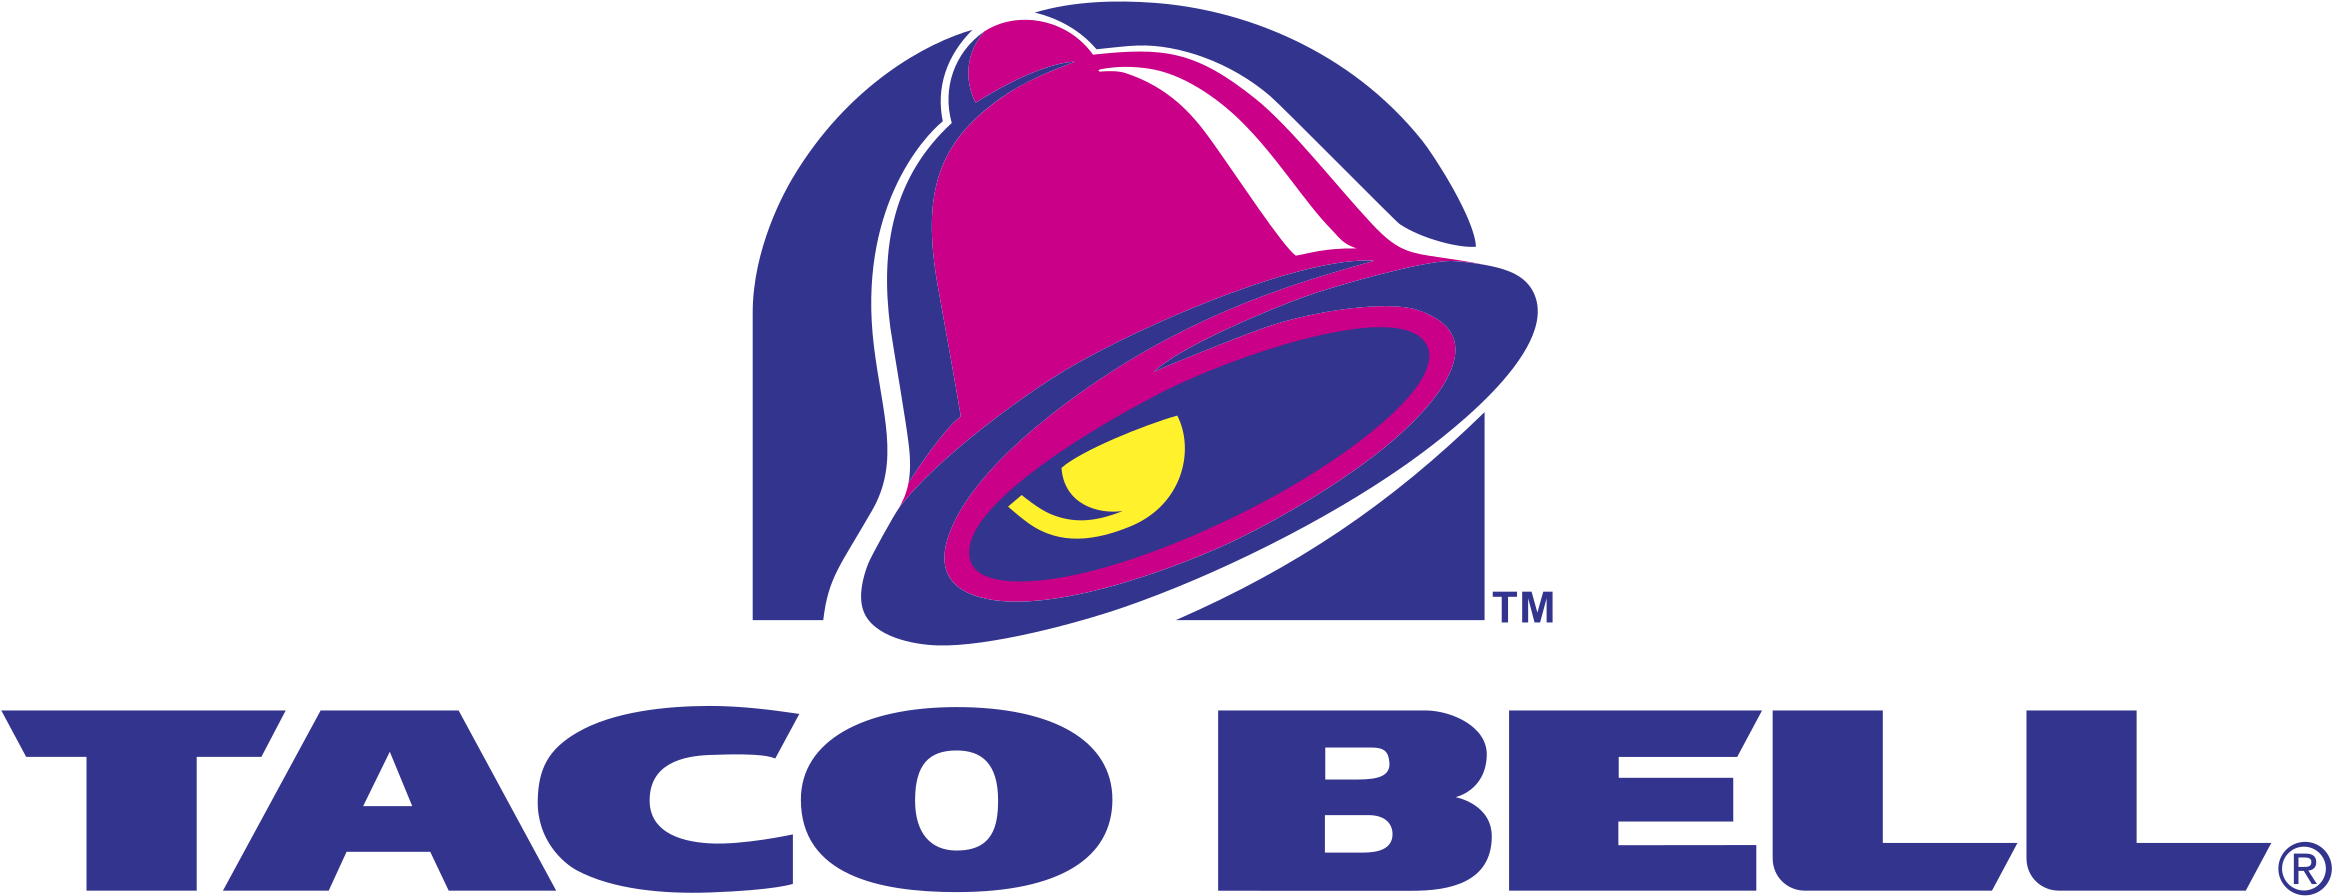 Taco Bell Logo2 - Taco Bell Logo No Background (720x276), Png Download